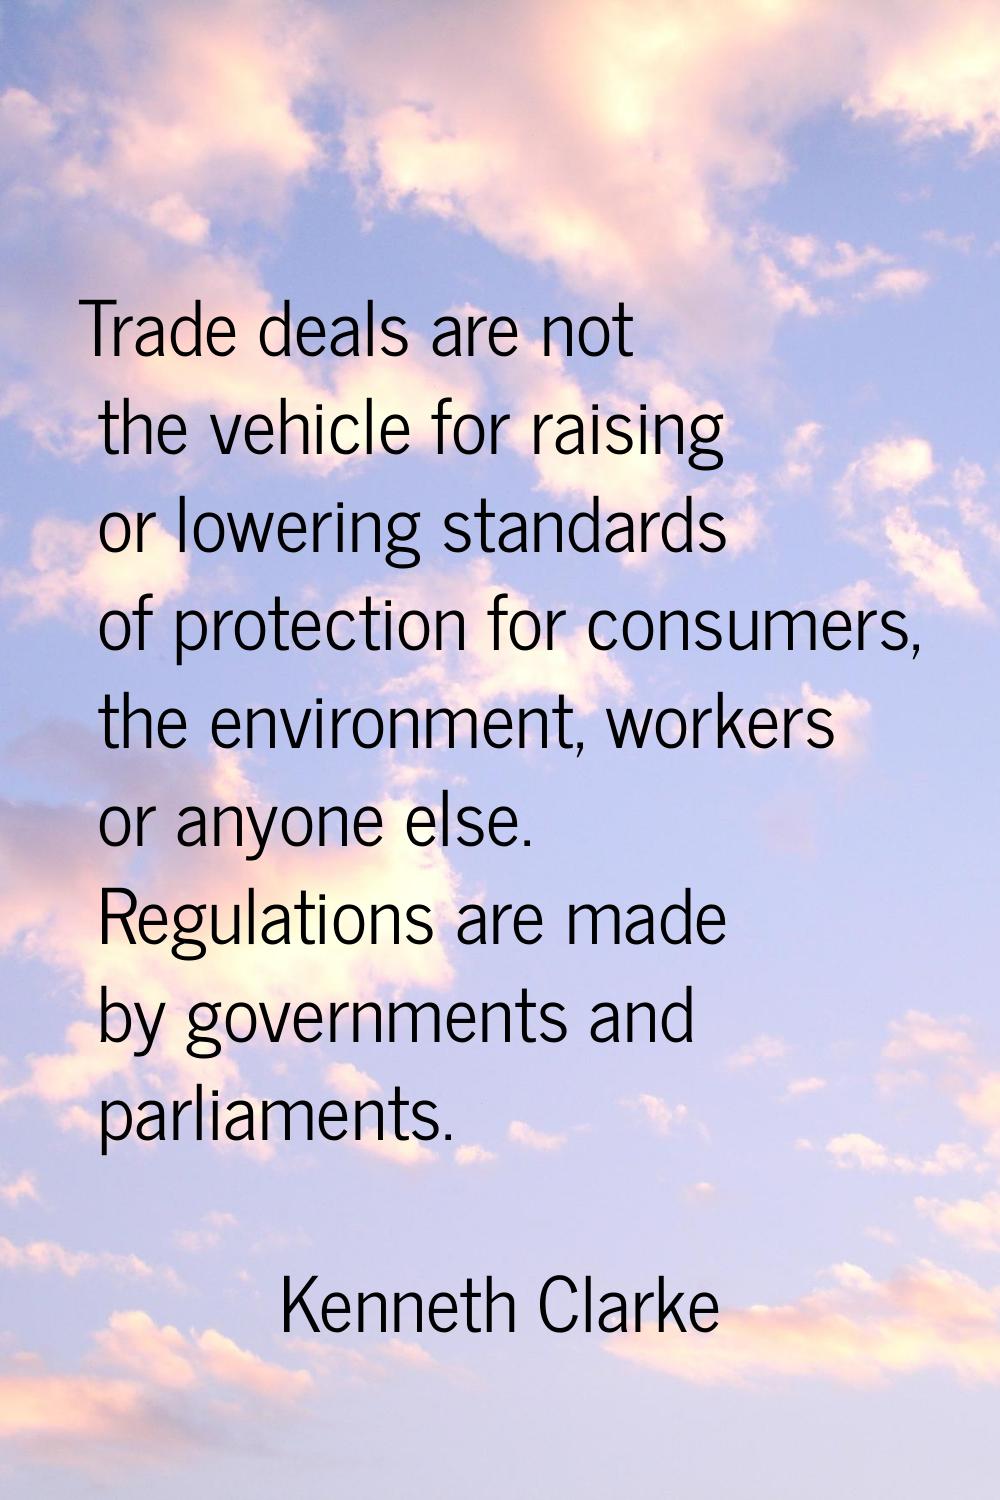 Trade deals are not the vehicle for raising or lowering standards of protection for consumers, the 